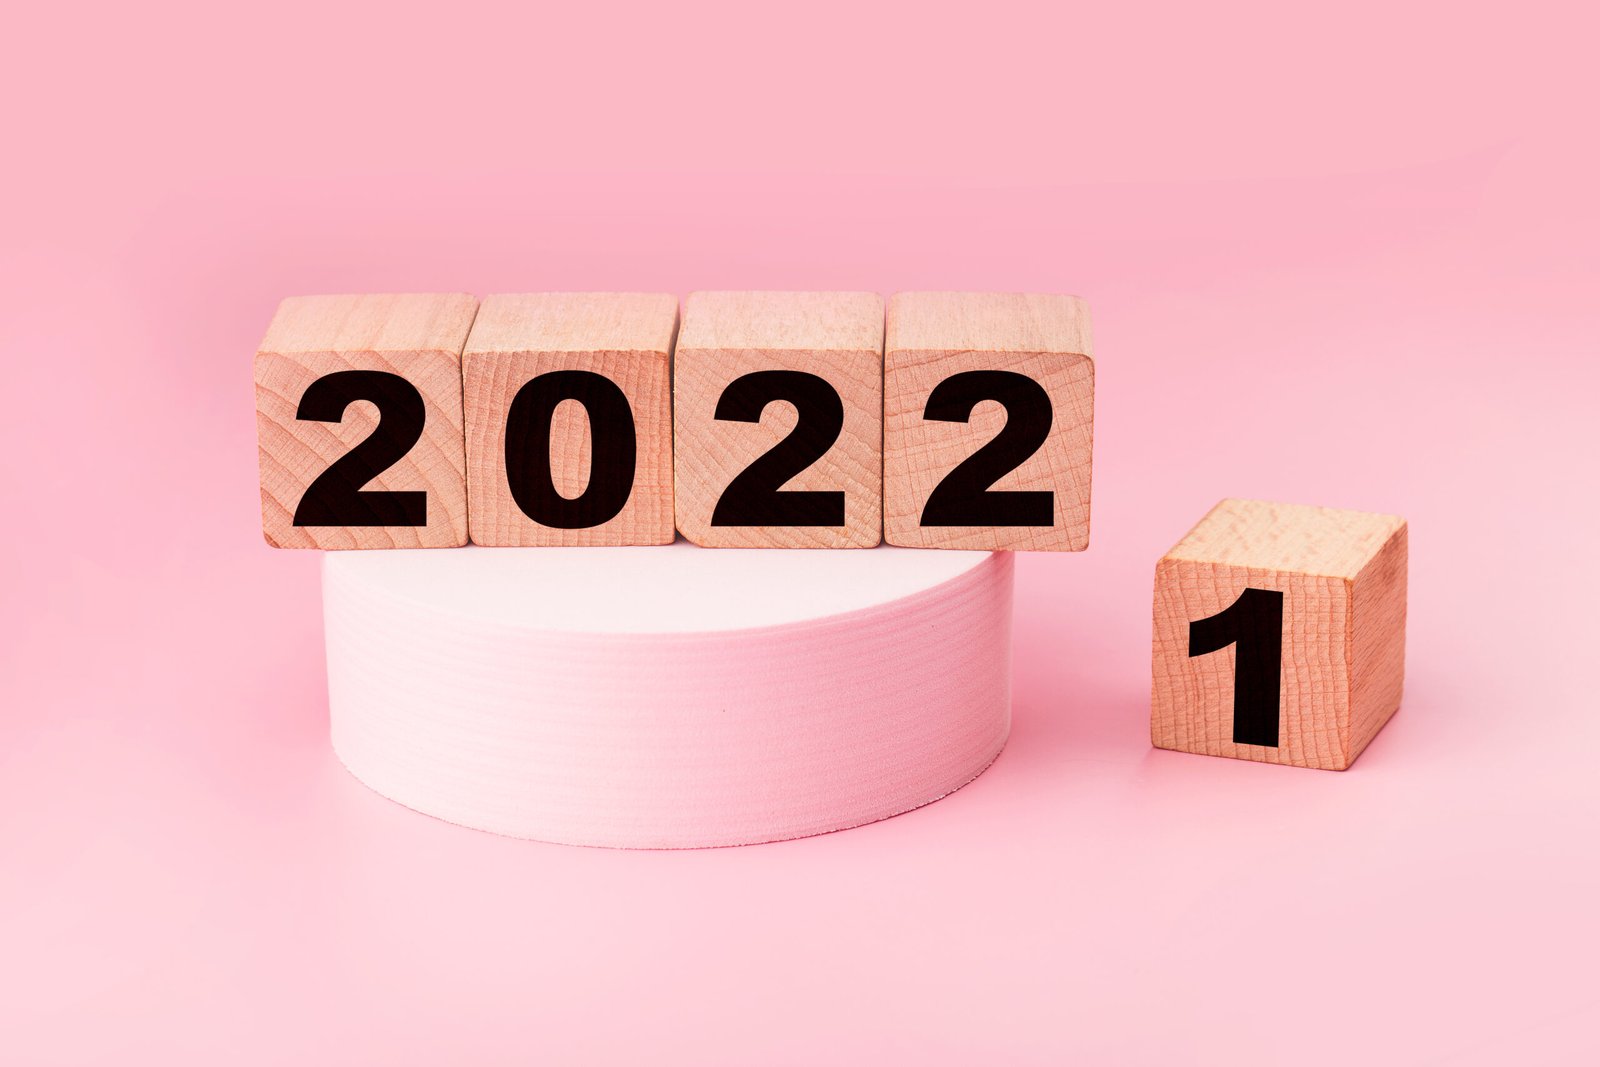 7 GREAT BUSINESSES TO START IN 2022